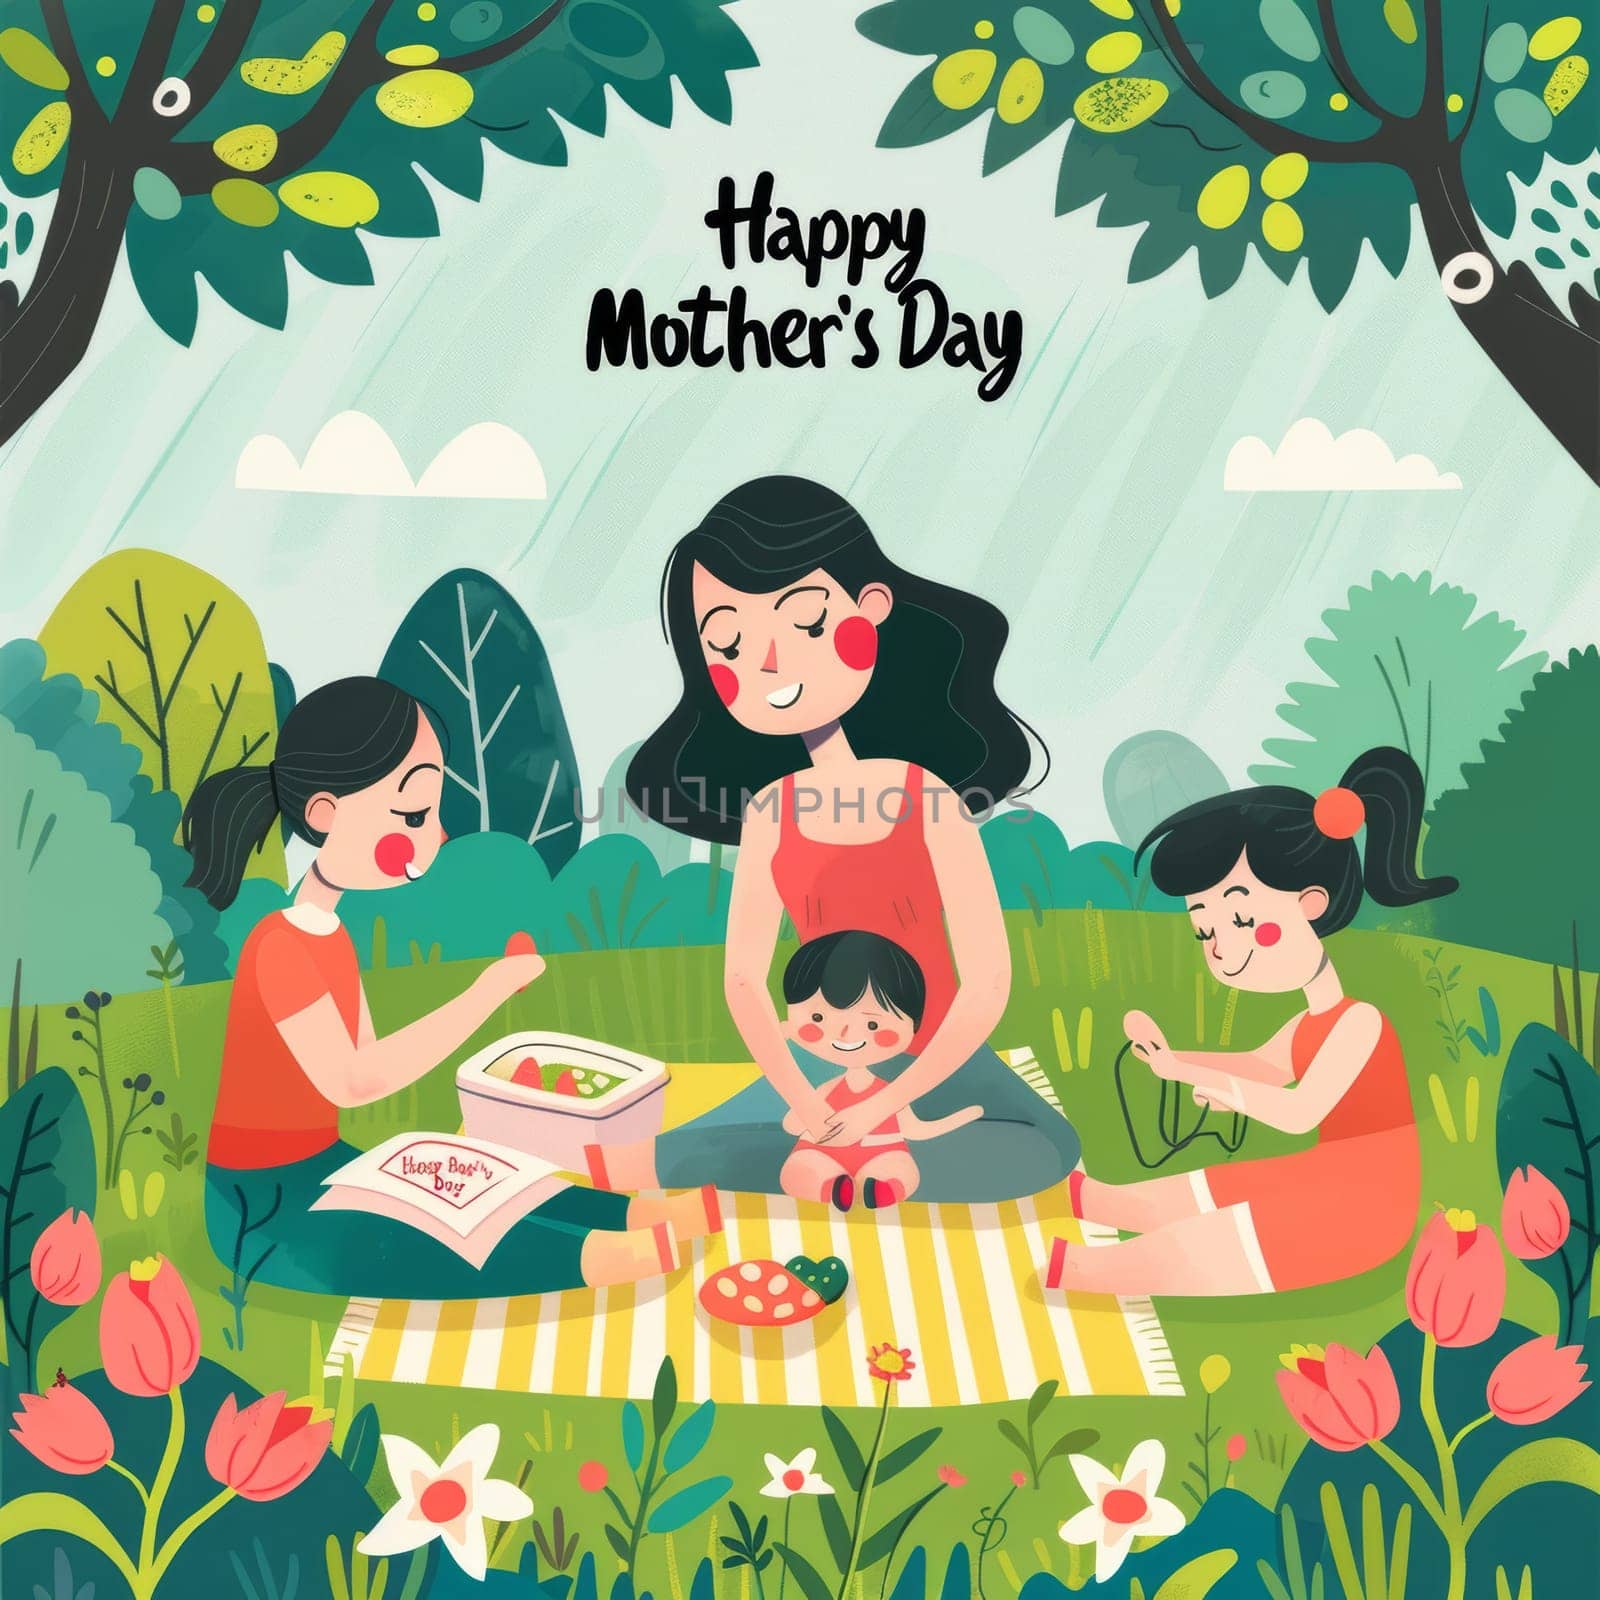 A delightful image showcasing a mother with her children engaged in a cheerful picnic, celebrating Mothers Day amidst a field of tulips